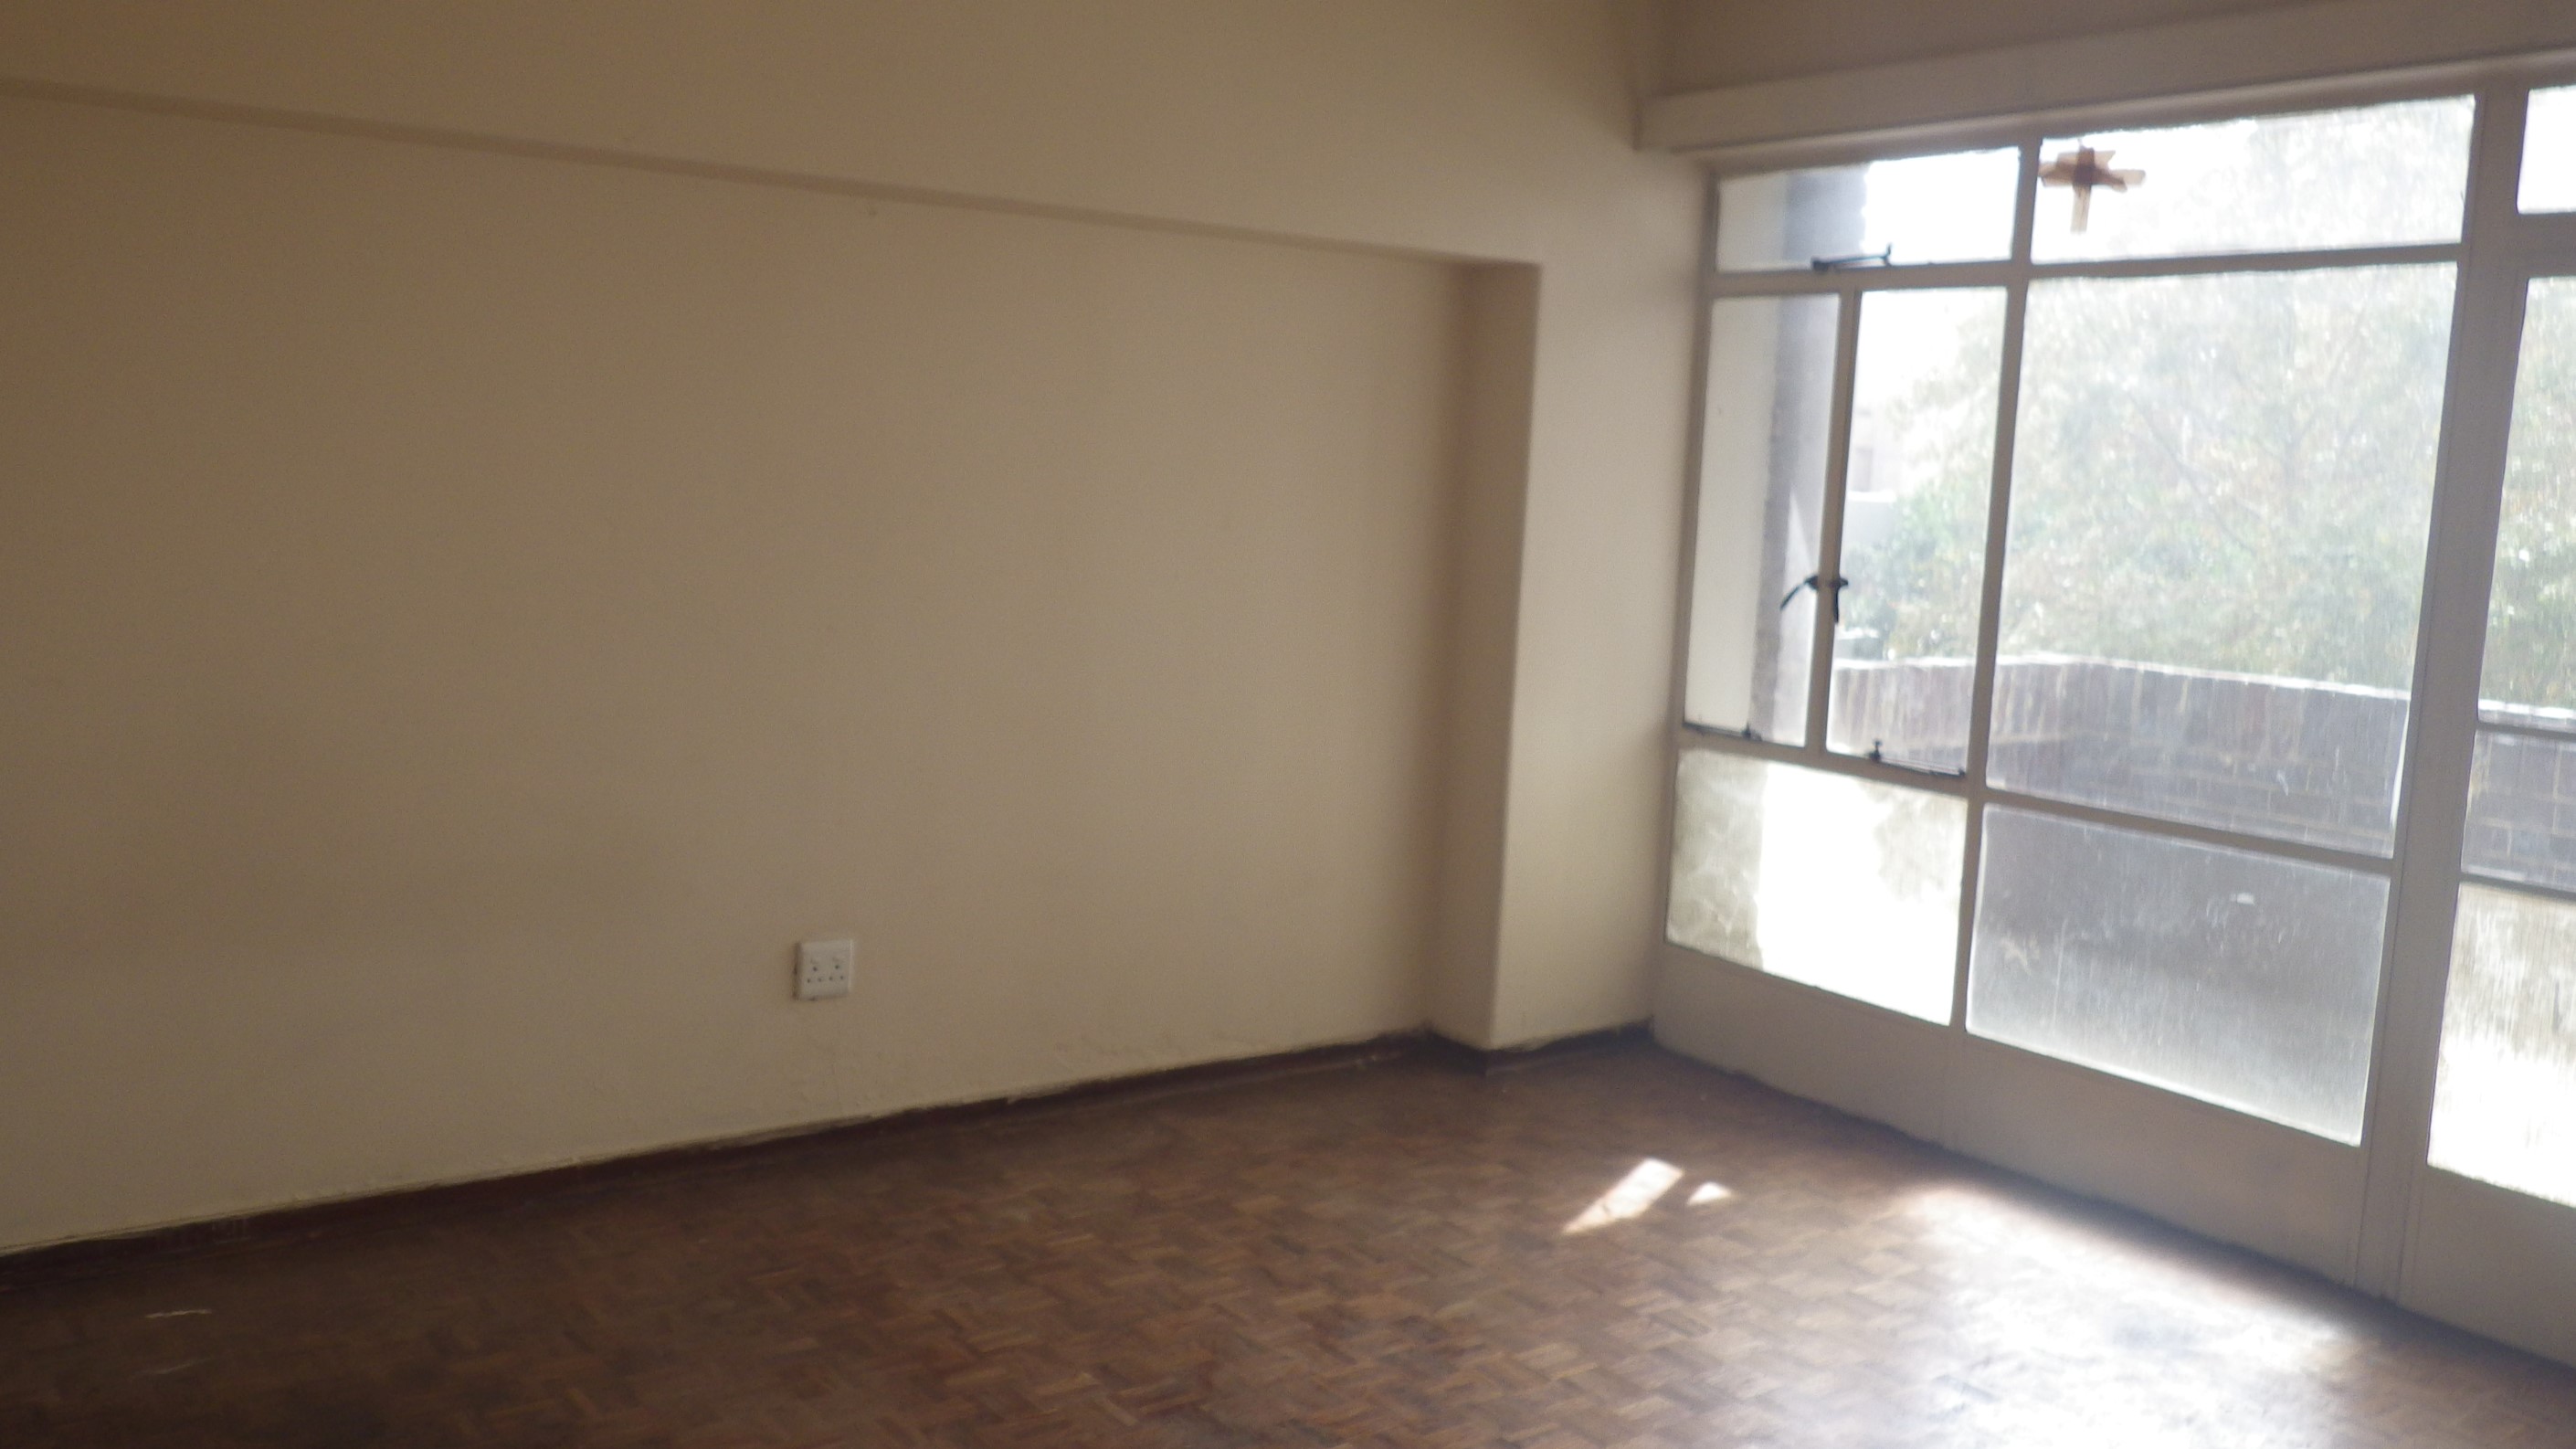 Spacious bachelor flat in the heart in the johannesburg CBD!